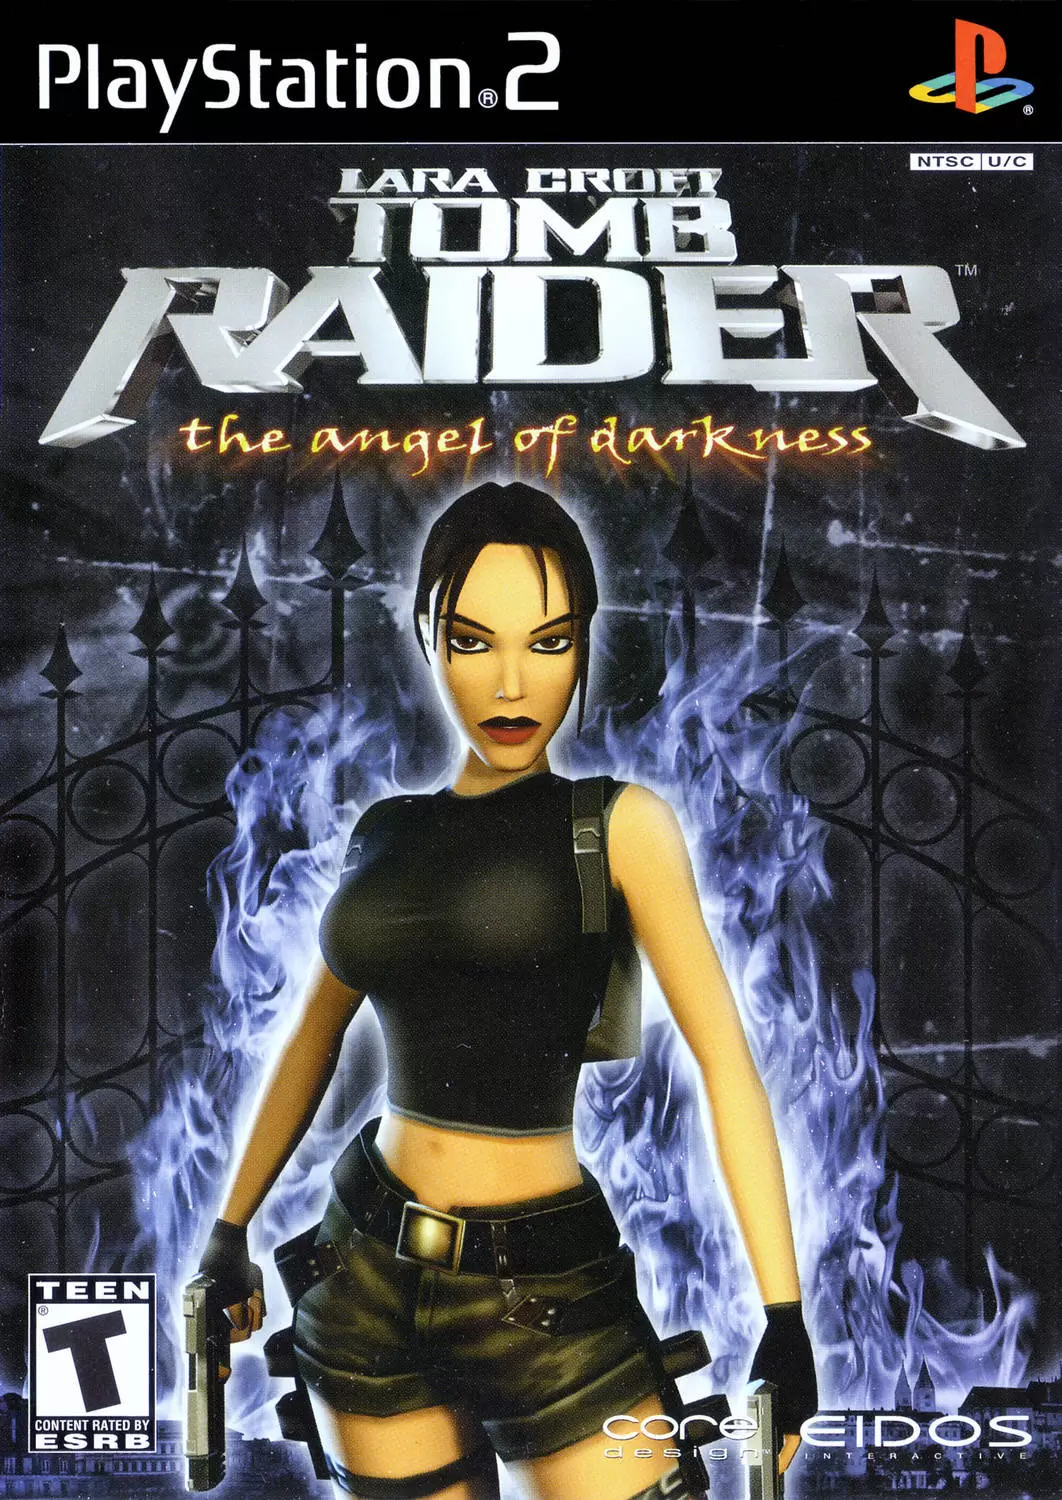 PS2 Games - Tomb Raider: The Angel of Darkness